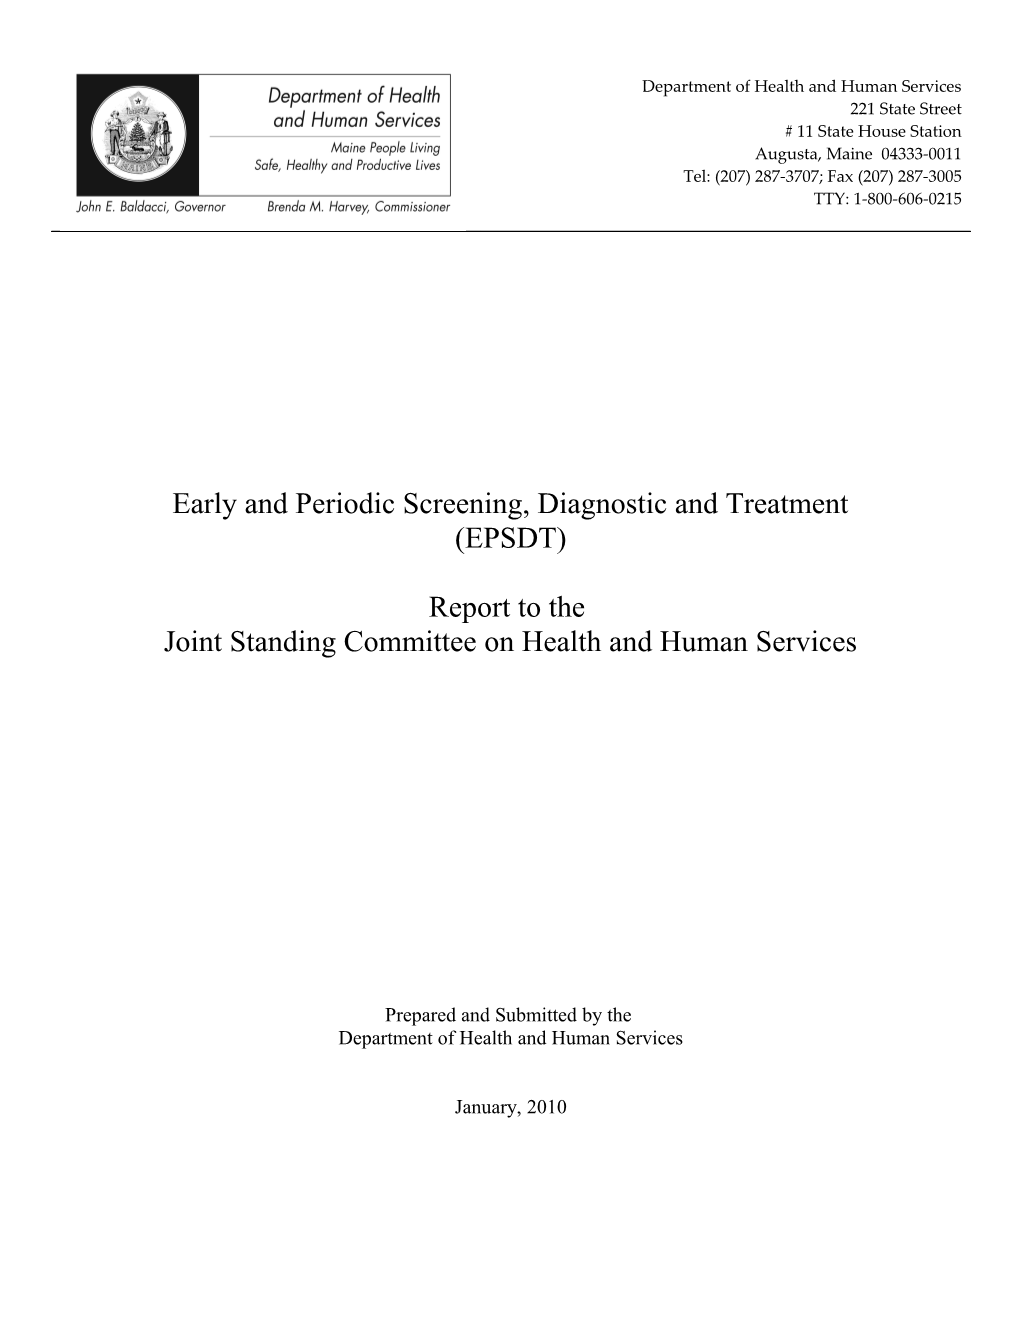 Early and Periodic Screening, Diagnostic and Treatment (EPSDT)